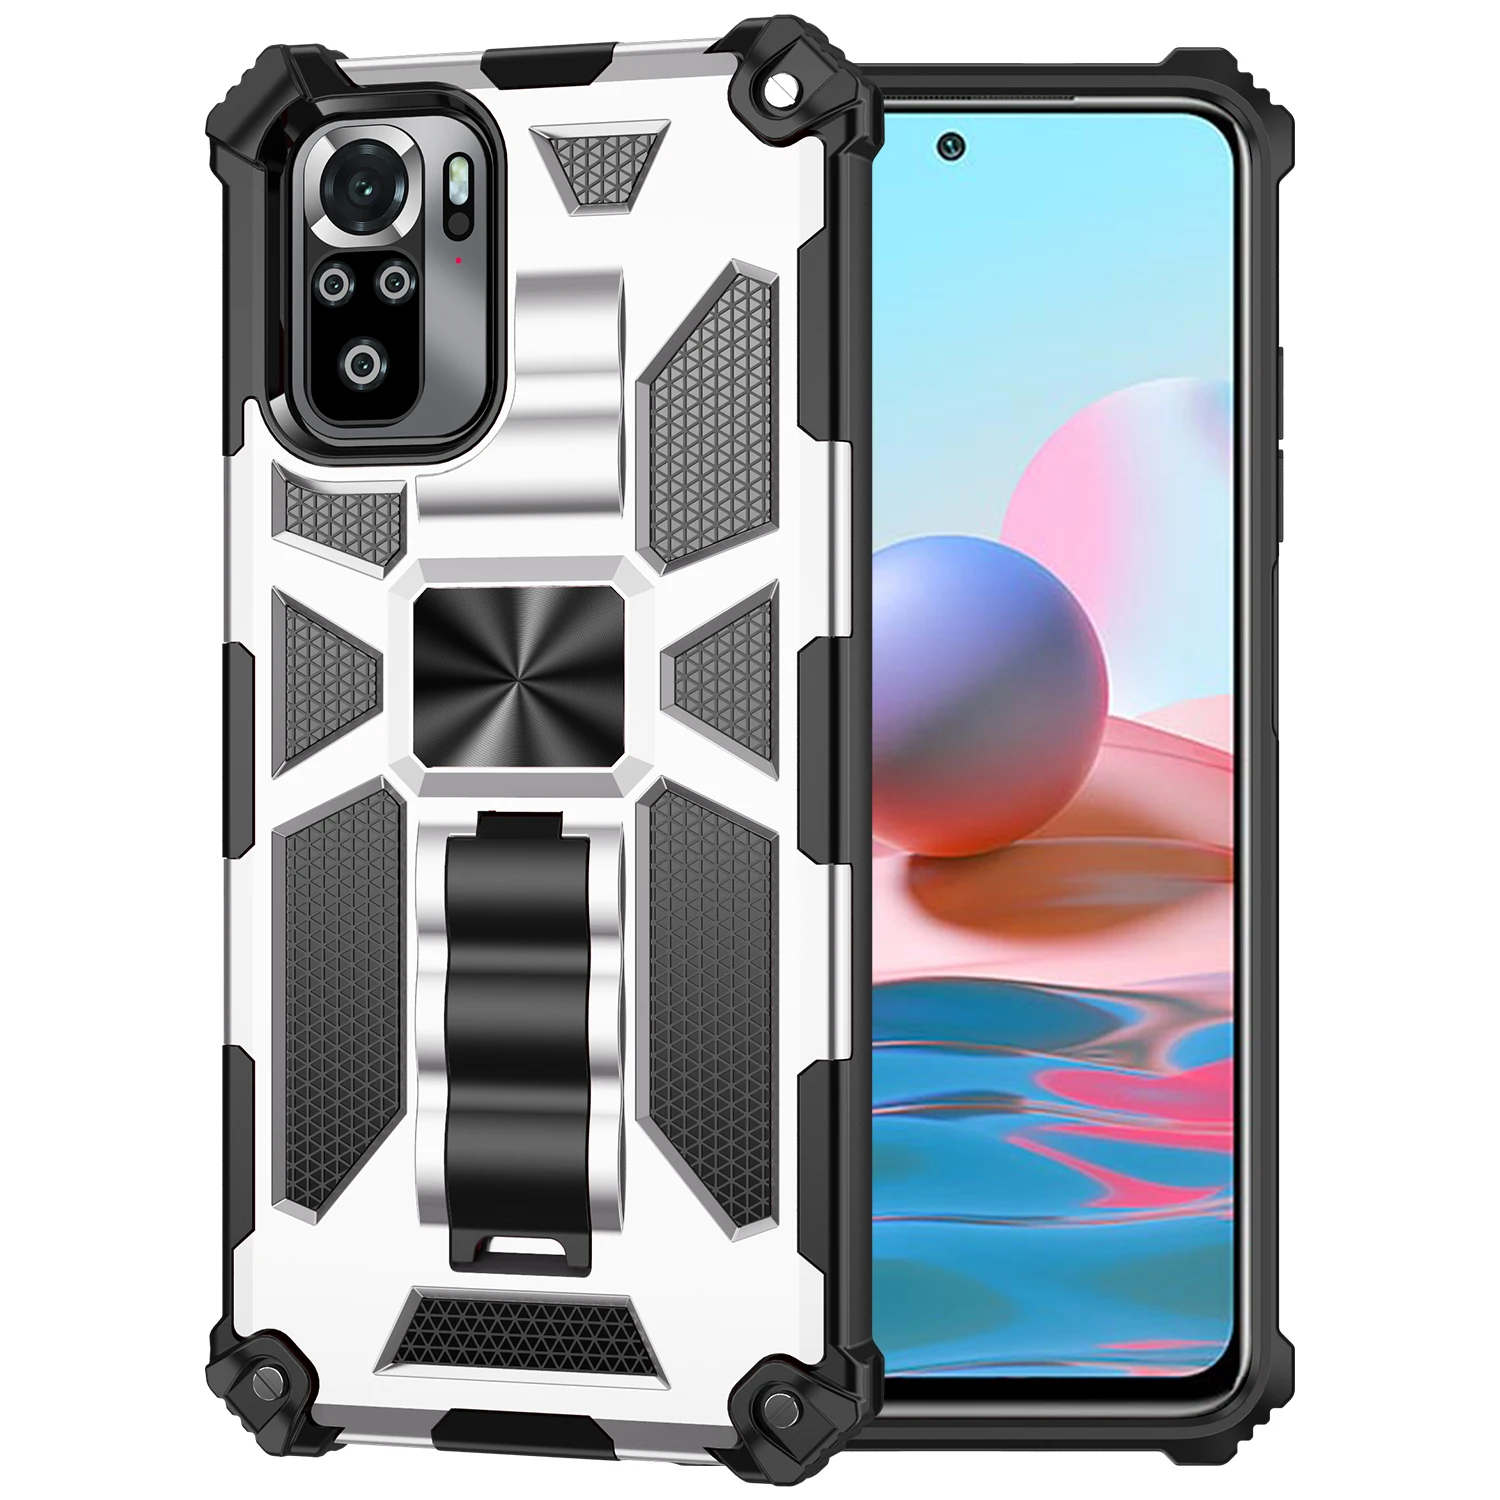 Rugged Bracket Armor Phone Case For Xiaomi Redmi Note 10 10S Pro Max 4G  With Metal magnetic Shockproof Anti Fall Protector Cover|Phone Case &  Covers| - AliExpress